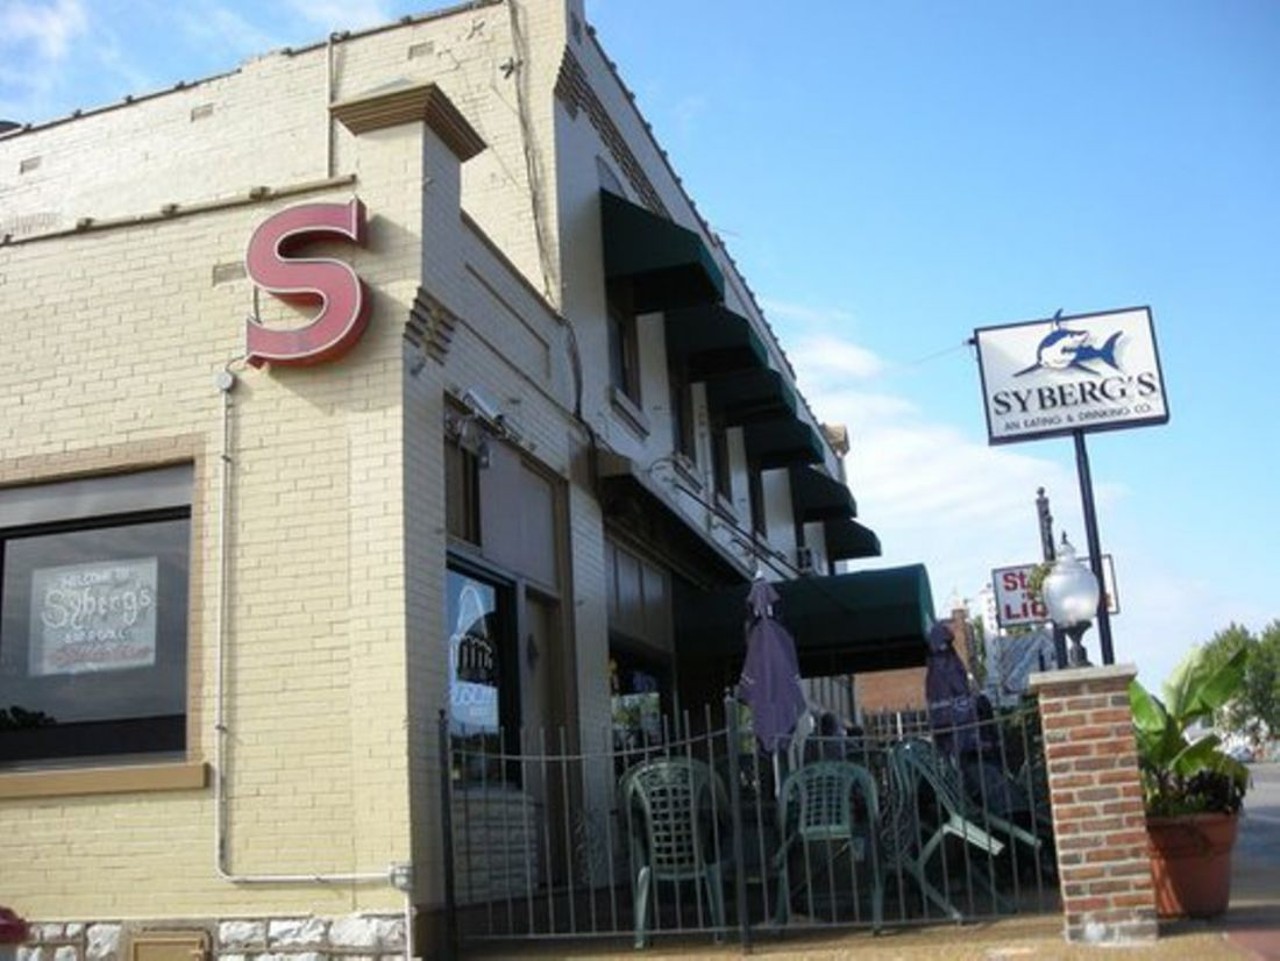 Syberg's
Locations on Market, Gravois, Dorsett, Chesterfield, Arnold and O'Fallon, Il.
A great game atmosphere, tasty shark bites, lots of drink specials, a brunch buffet, catering -- is there anything Syberg's can't do? RFT Photo.